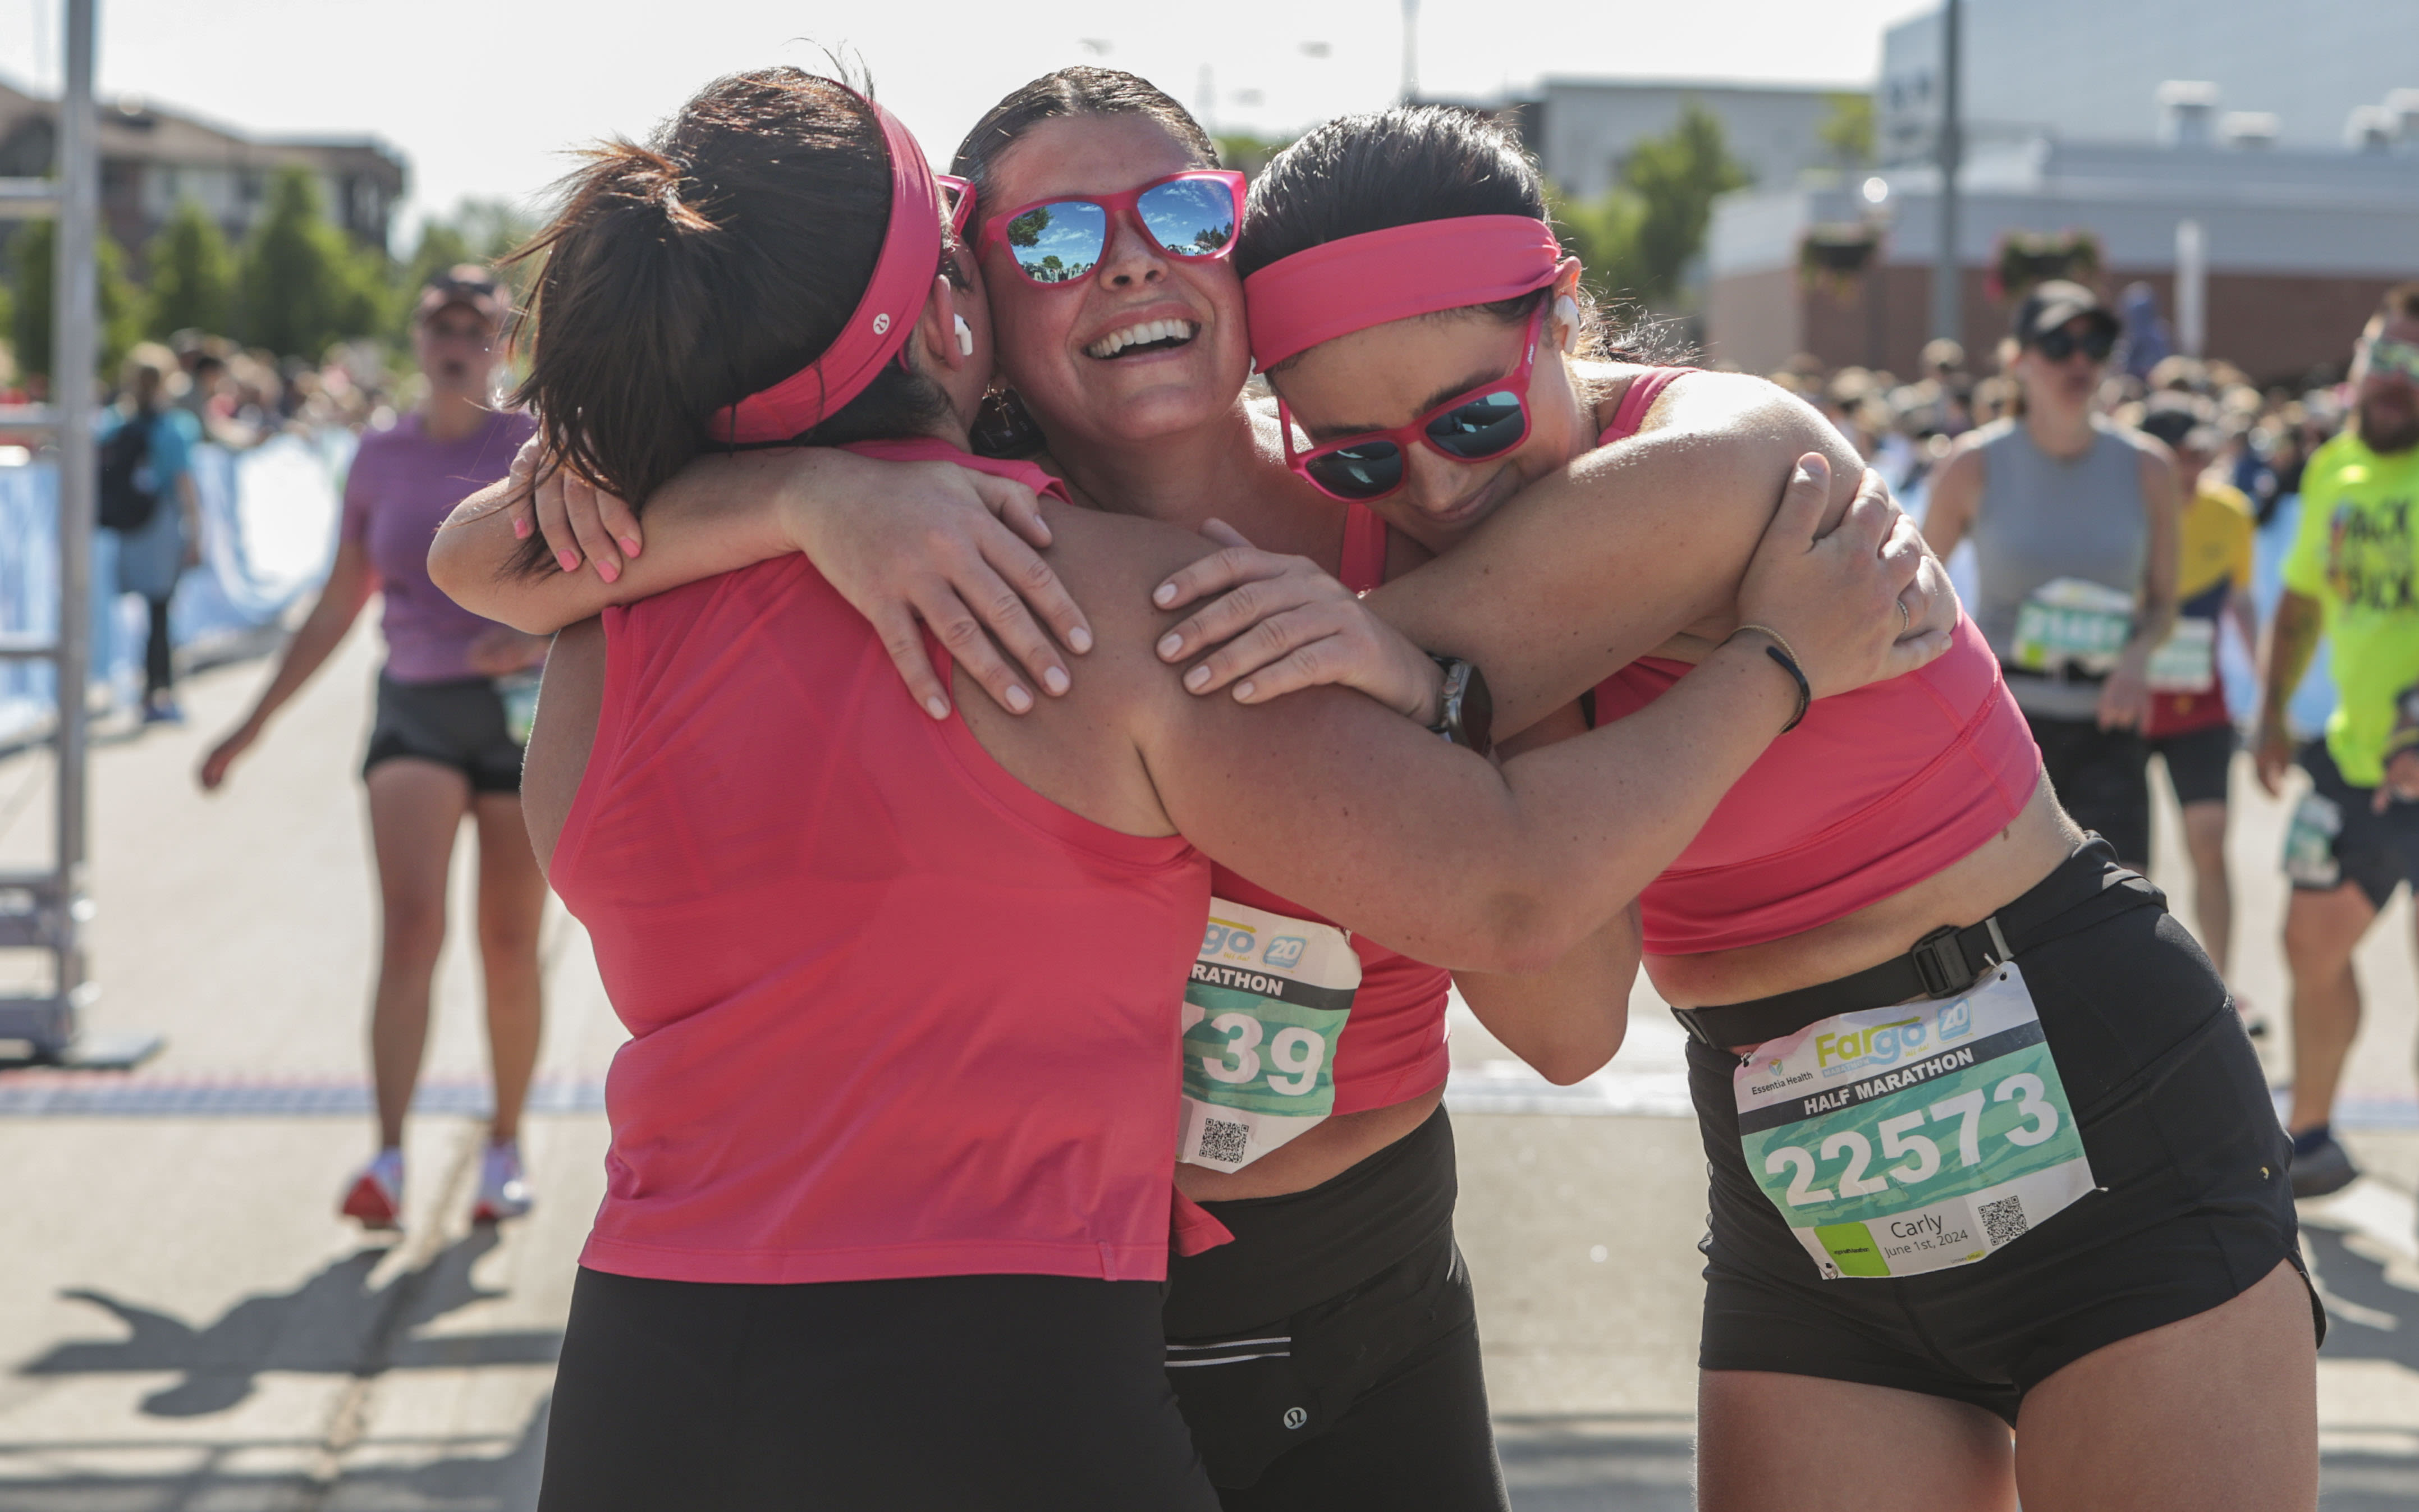 PHOTOS: Scenes from Saturday's final day of the 20th Fargo Marathon